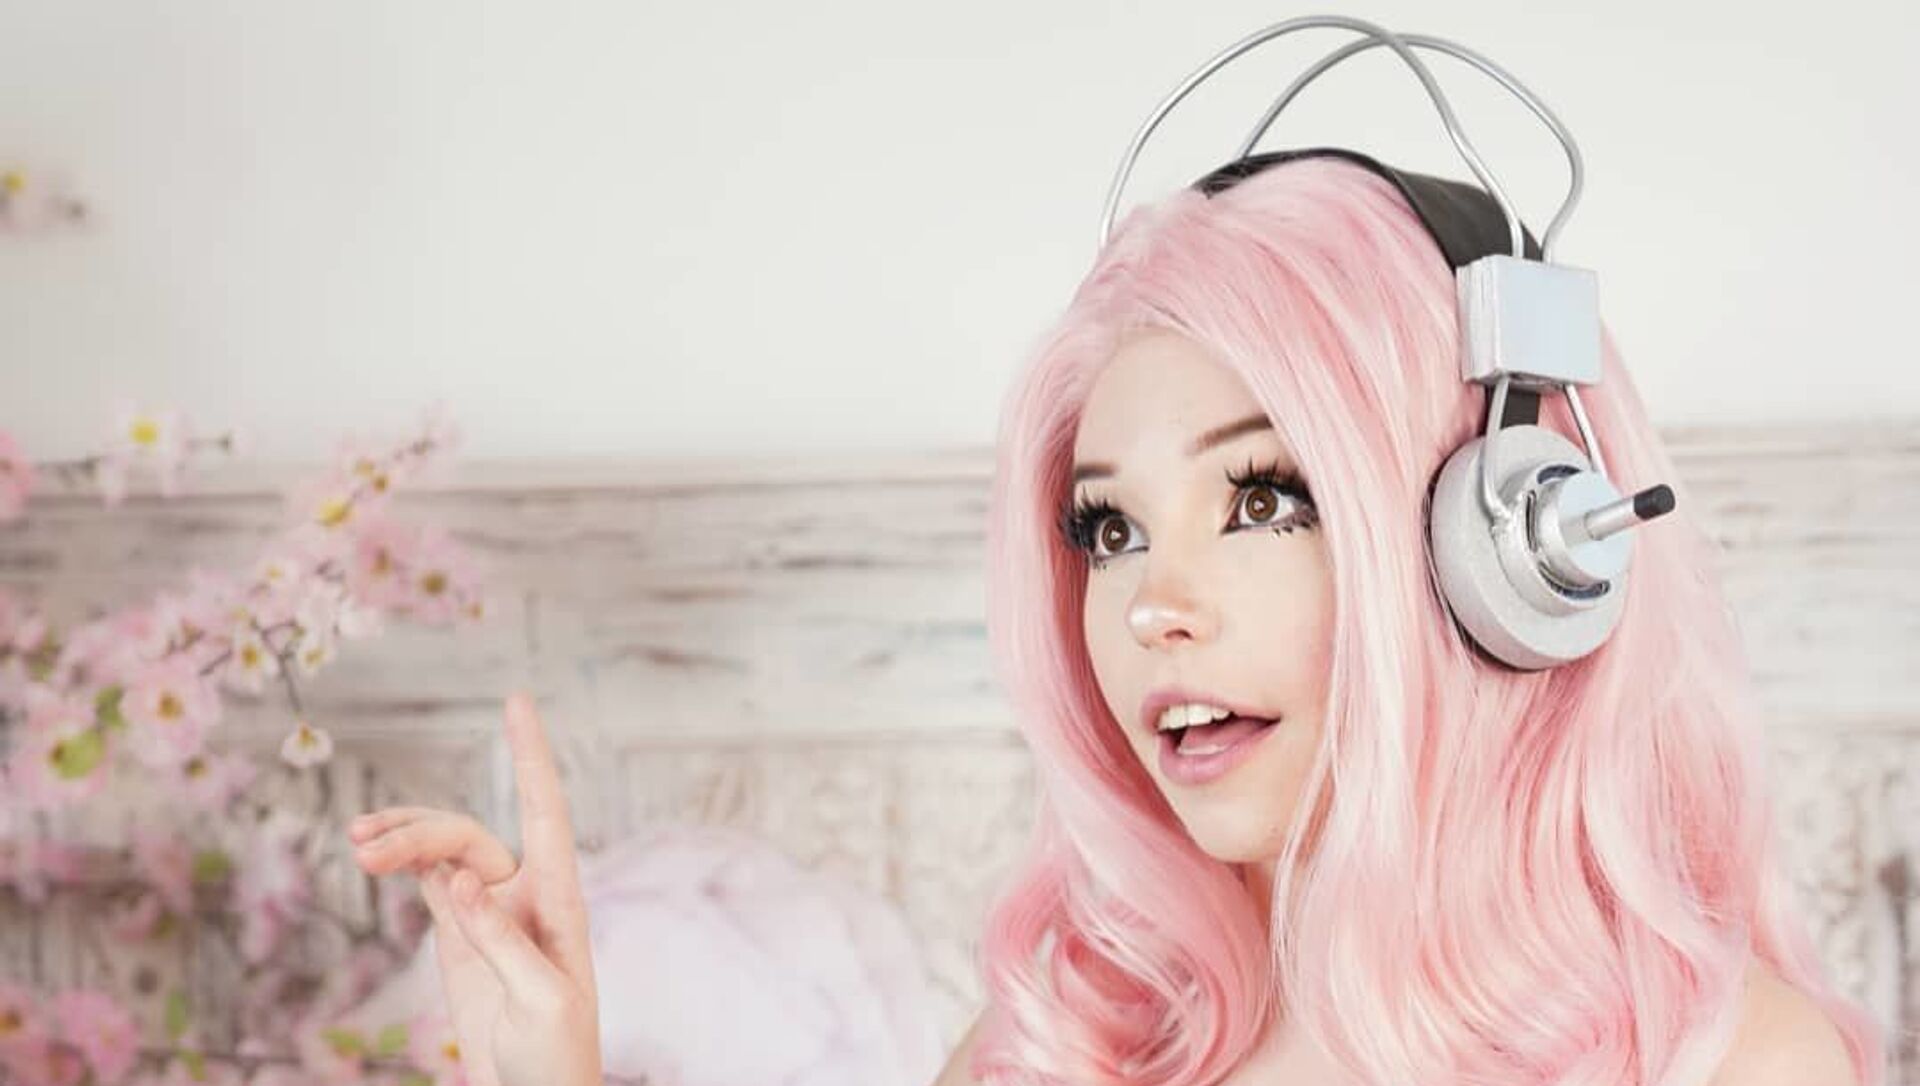 Why was belle delphine ban from instagram ? Account Deleted